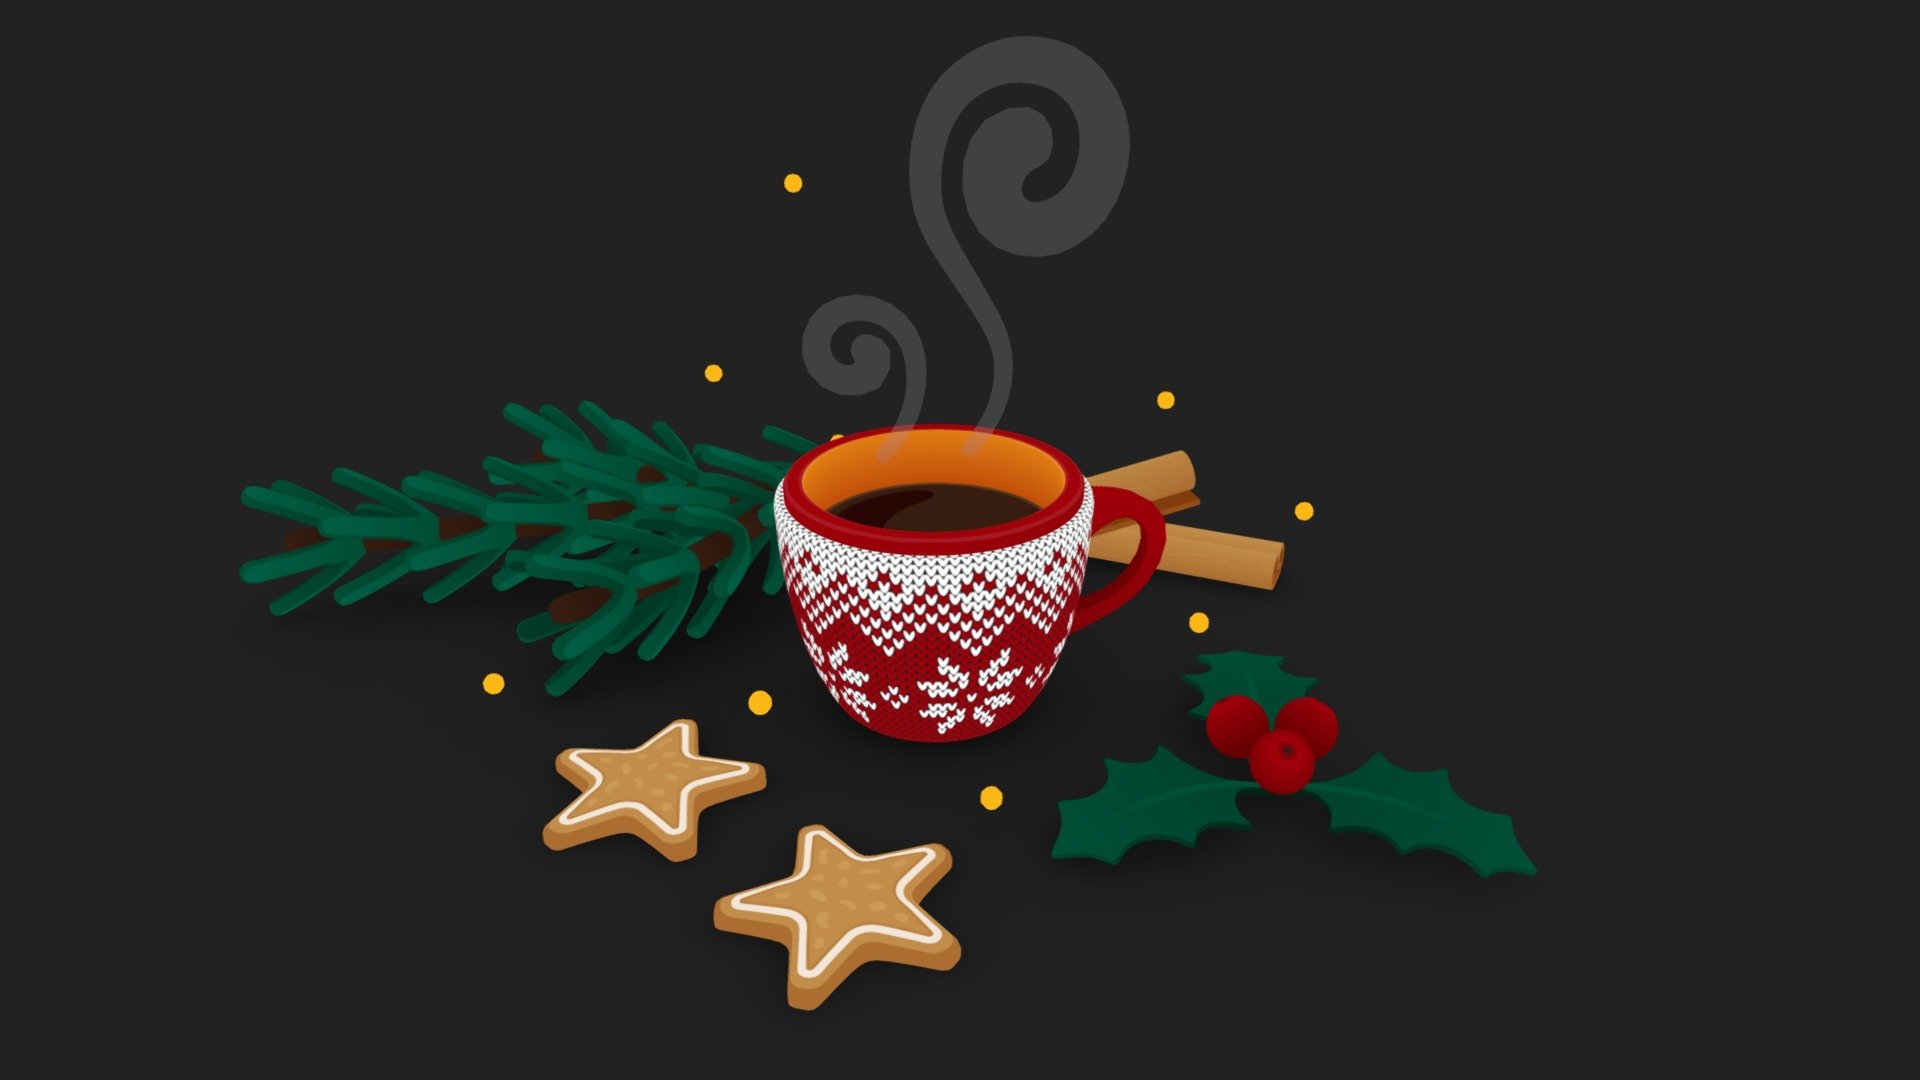 Merry christmas and happy new year Sketchfab!

Christmas scene with cup in a sweater, pine branch, holly, cookies, cinnamon and lights.
All models supports multiple subdivisions.
Bright vector textures.
Files: .c4d, .fbx, .obj, .mtl, + textures 3d model